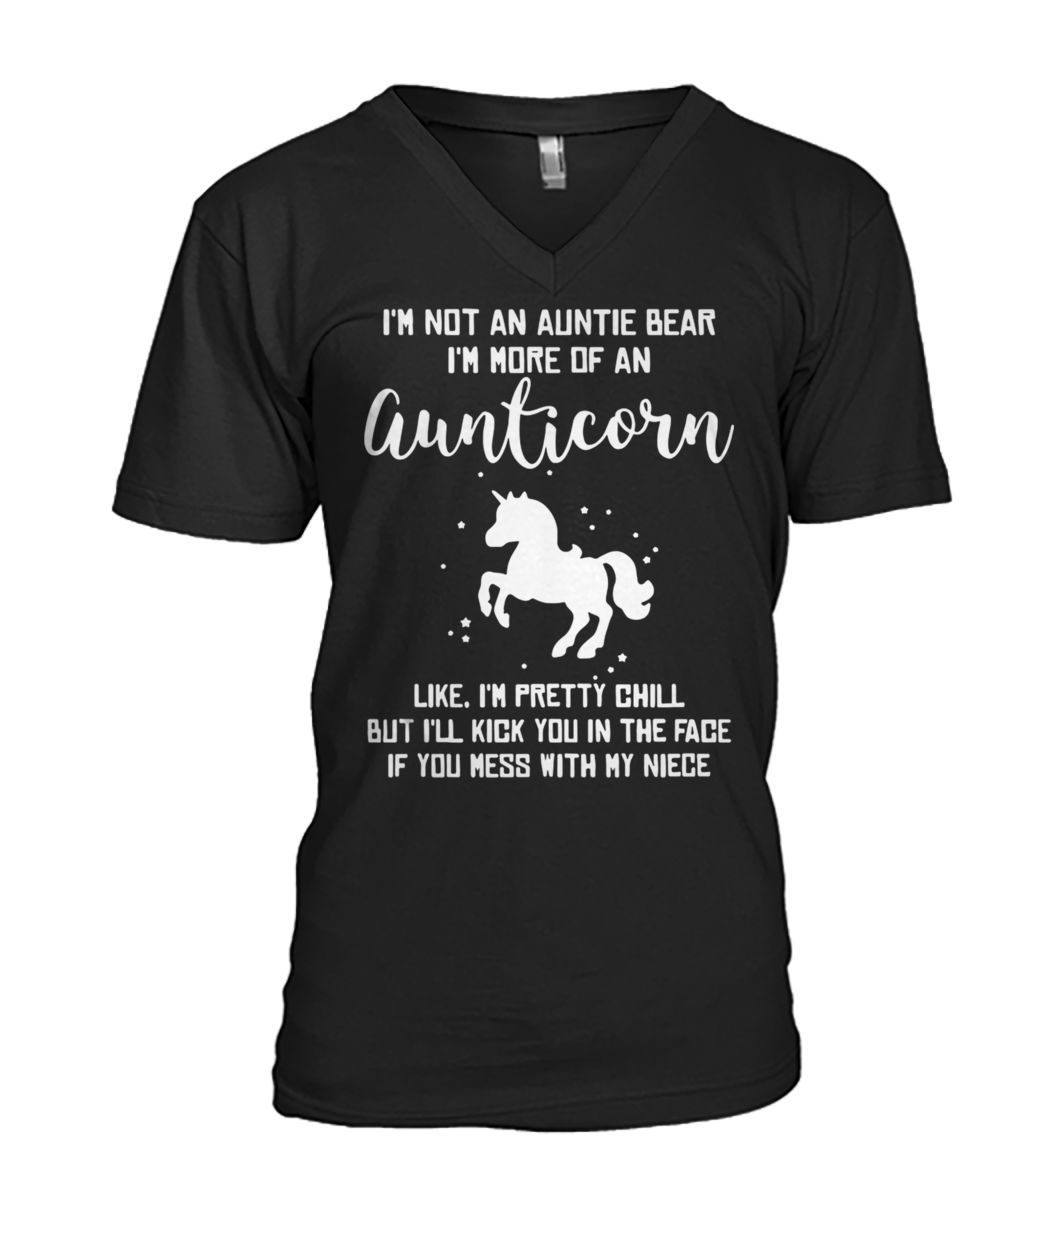 I’m not an auntie bear I’m more of an aunticorn like I’m pretty chill mens v-neck